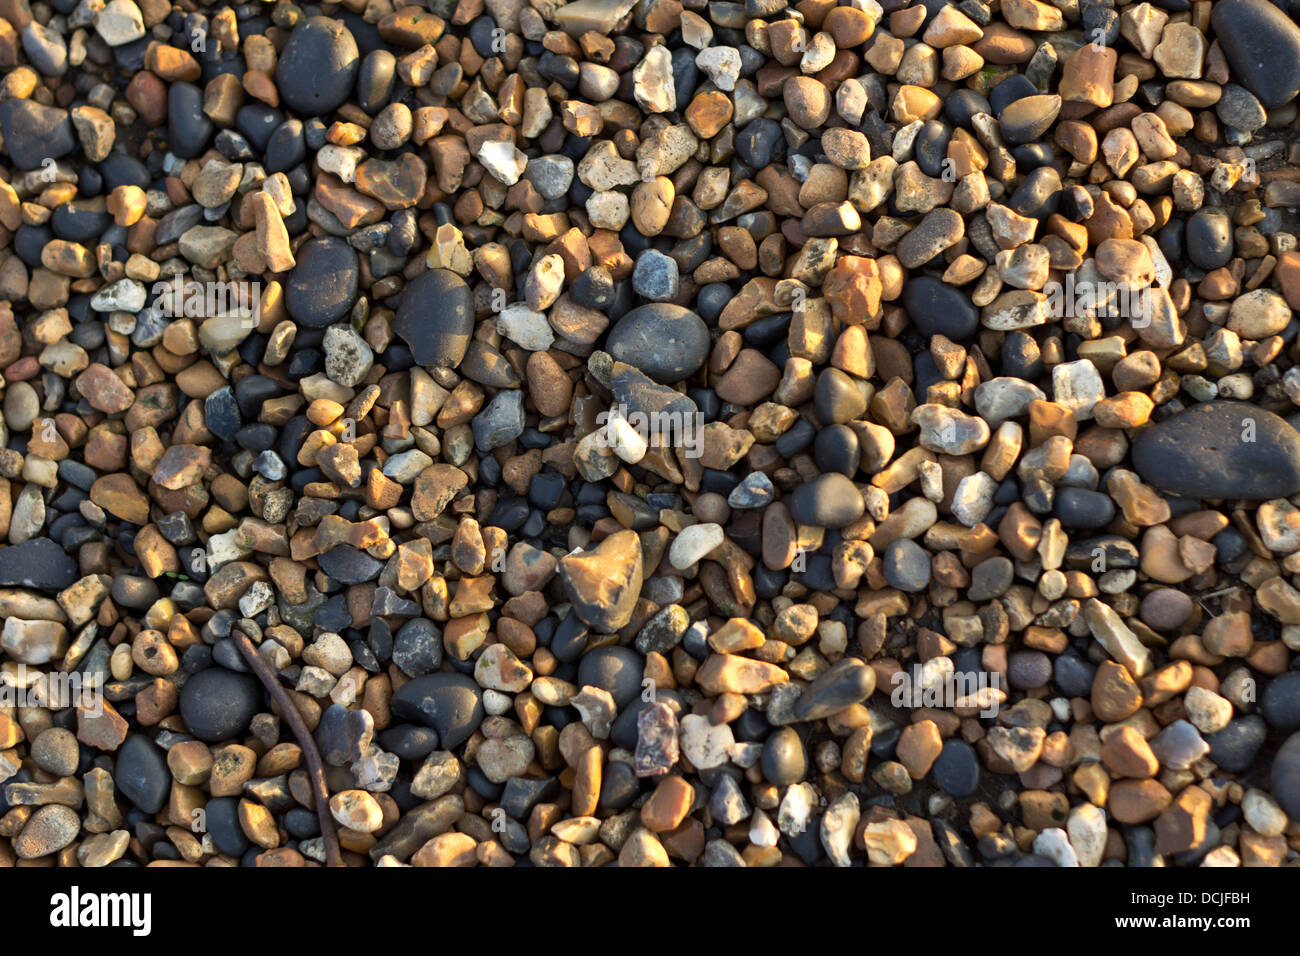 detail of stones and gravel at park in early morning light Stock Photo